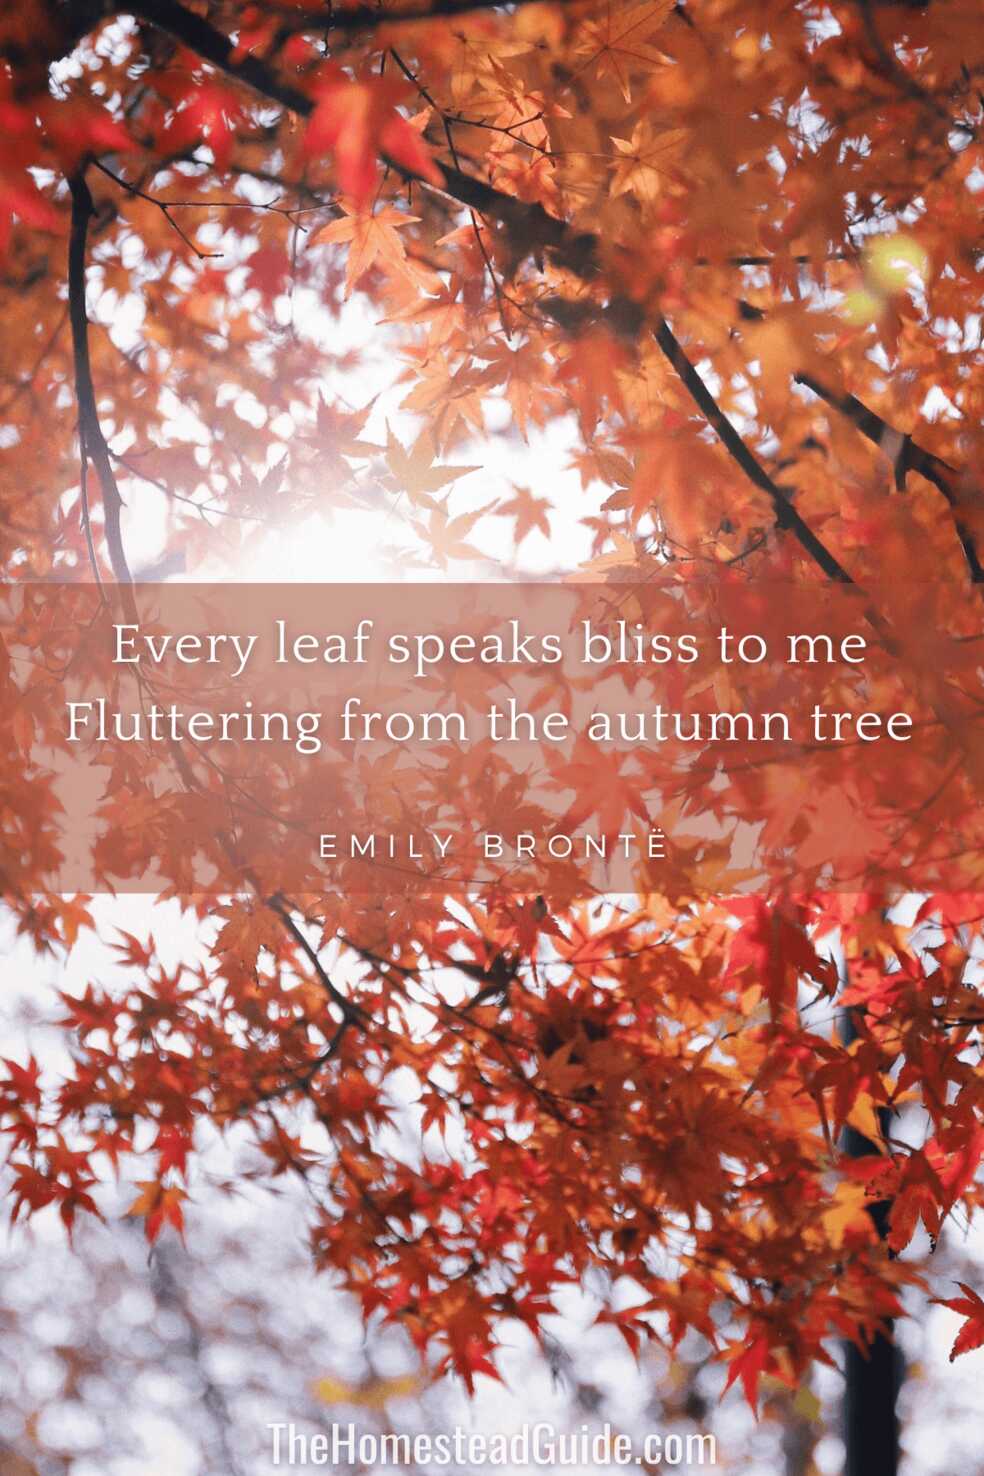 Every leaf speaks bliss to me Fluttering from the autumn tree.